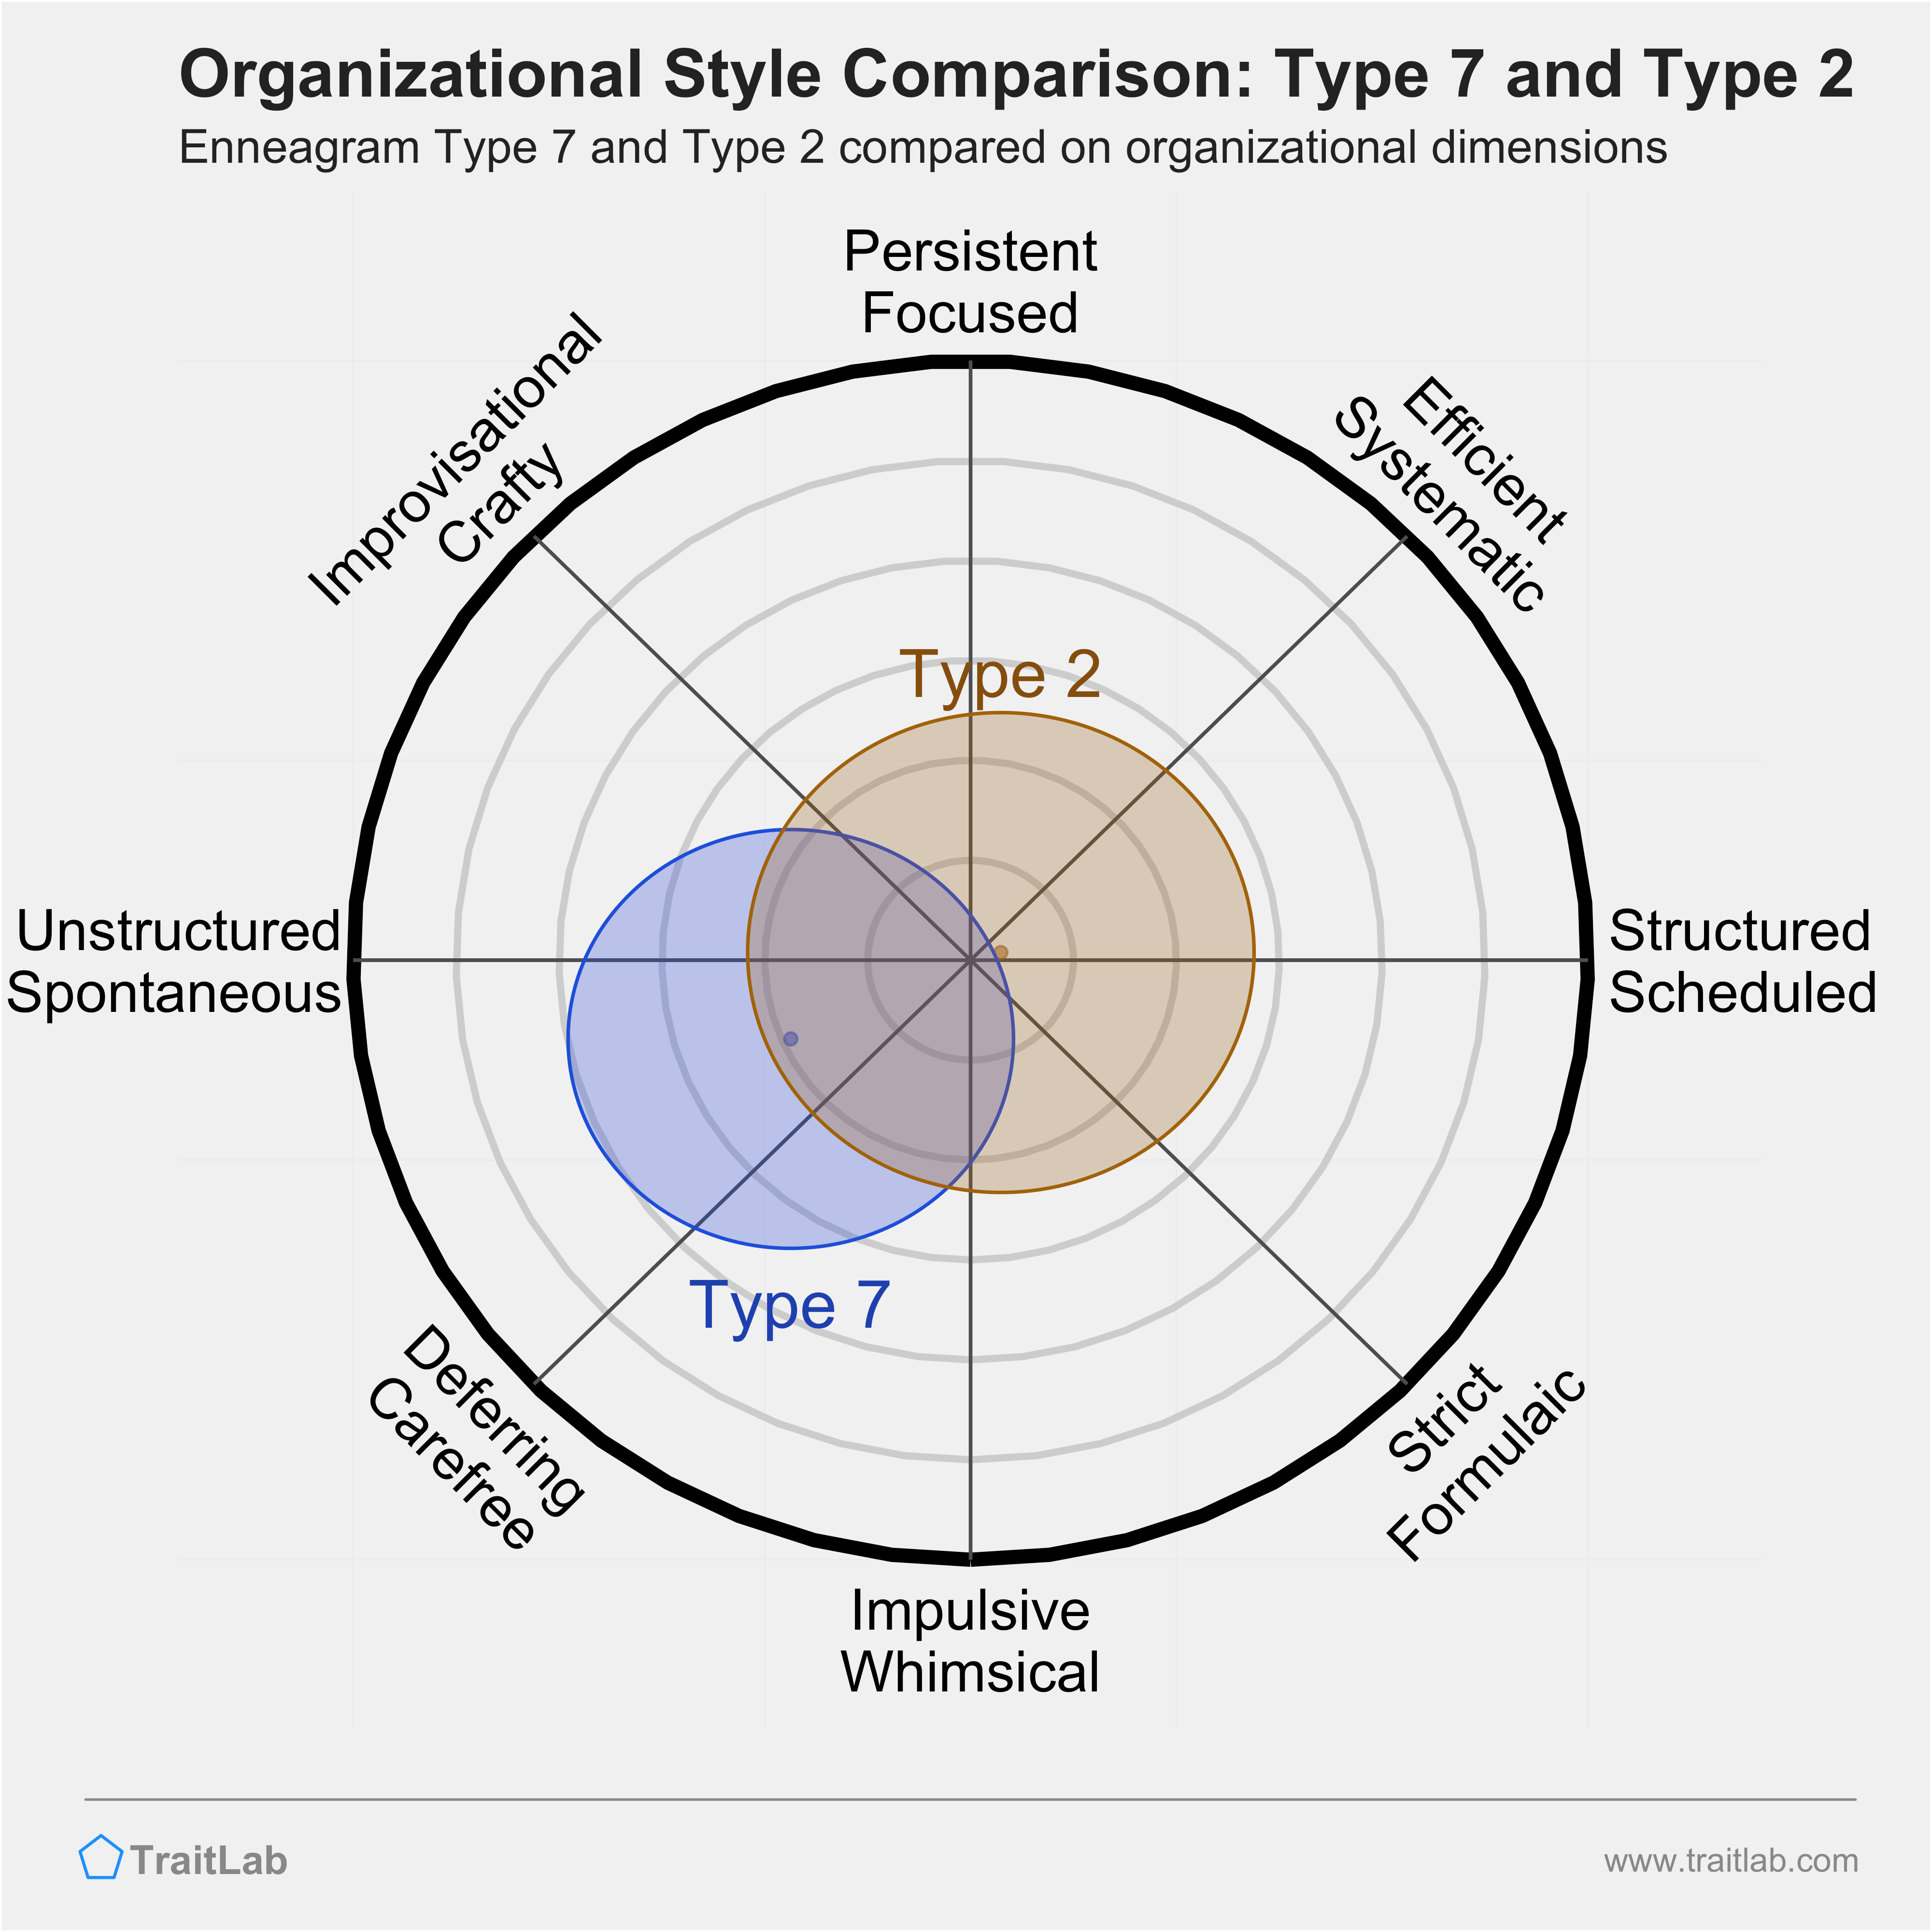 Type 7 and Type 2 comparison across organizational dimensions